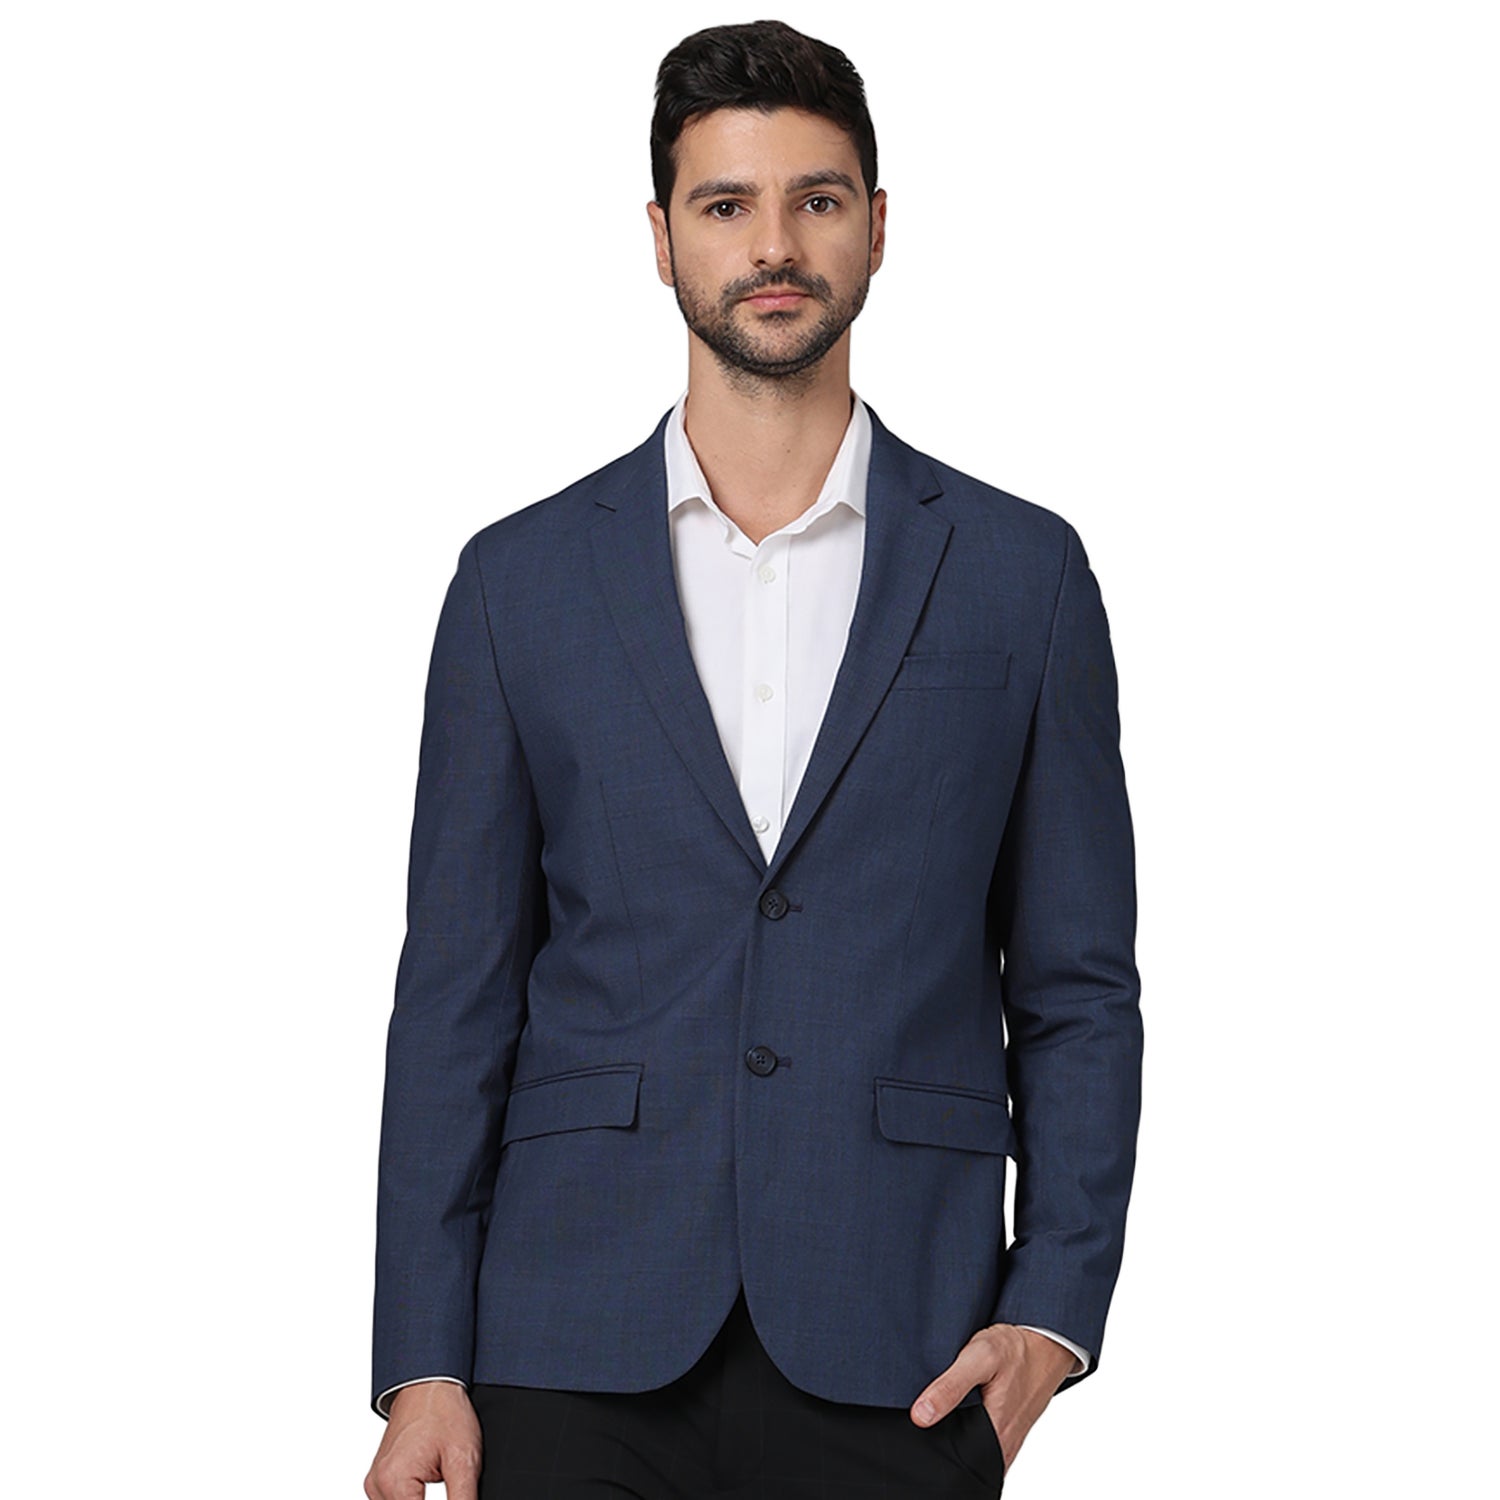 Men Navy Blue Notched Solid Slim Fit Polyester Suit Jacket (GUGABINFUN)